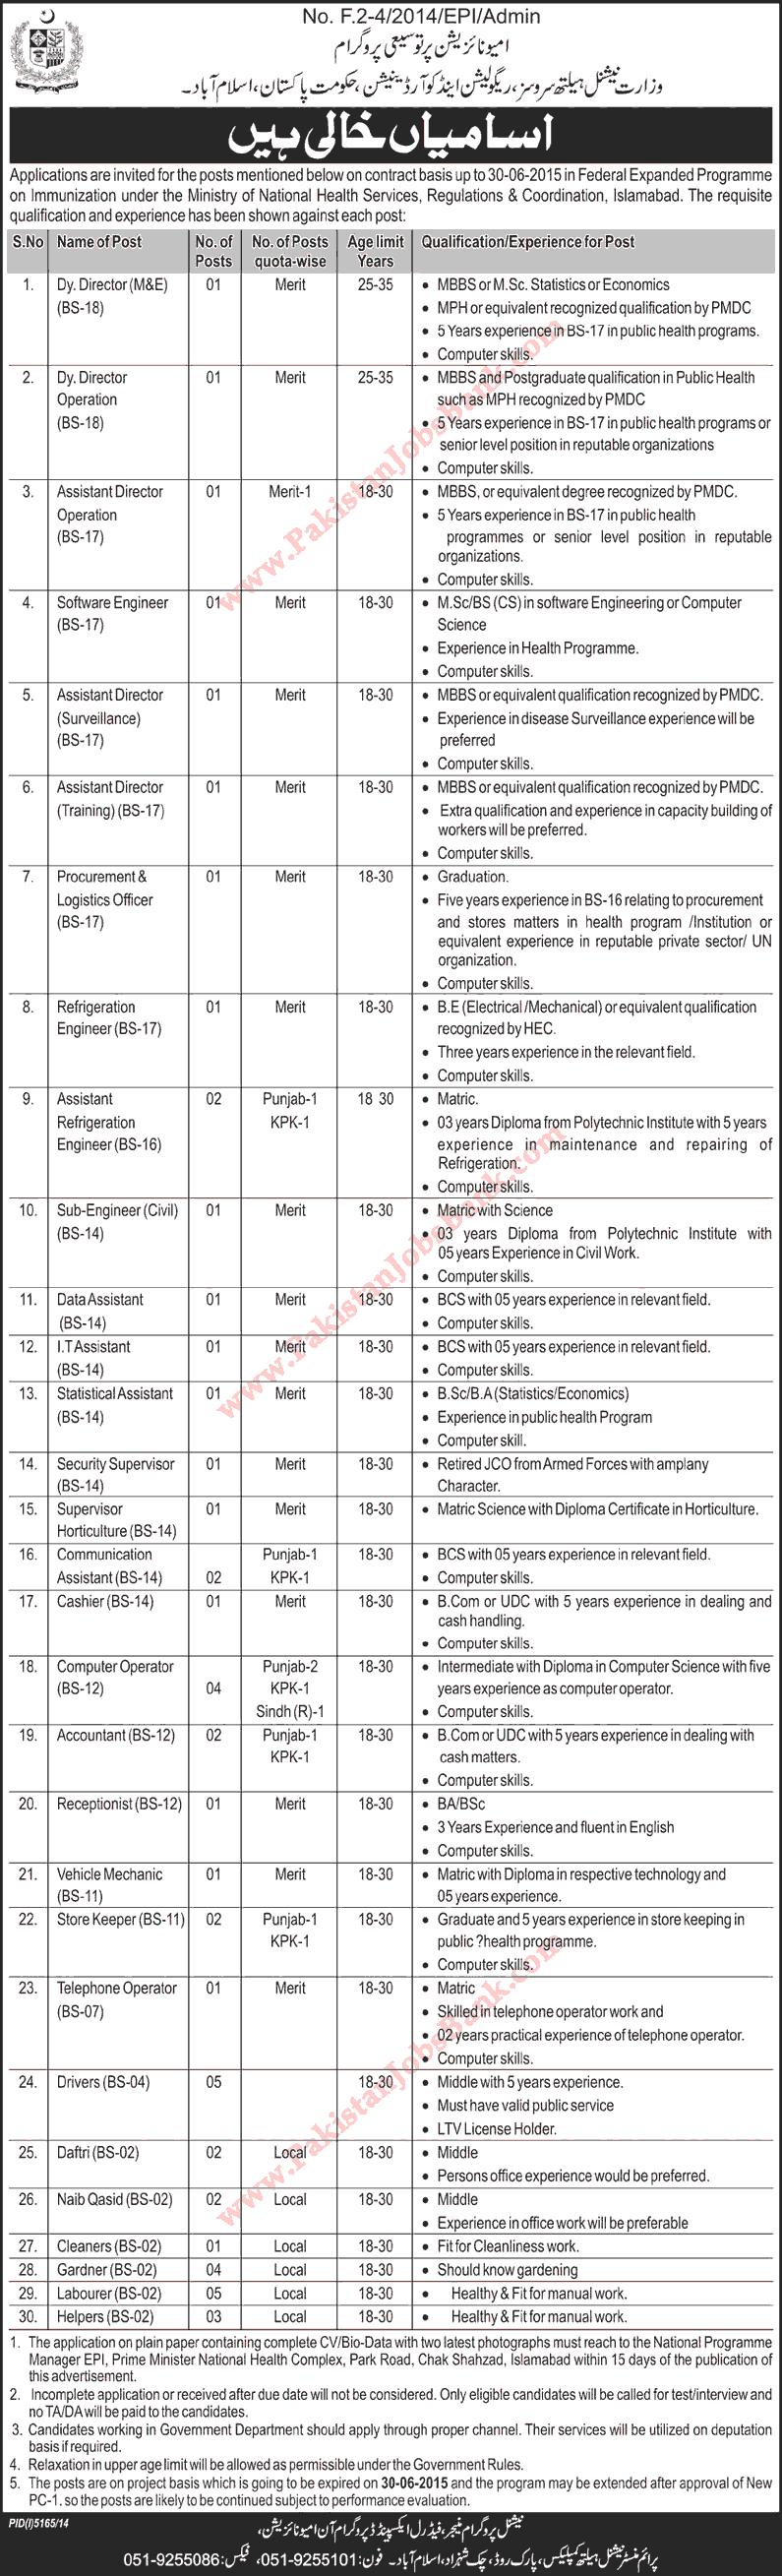 Ministry of National Health Services Regulations & Coordination Islamabad Jobs 2015 April NHSRC